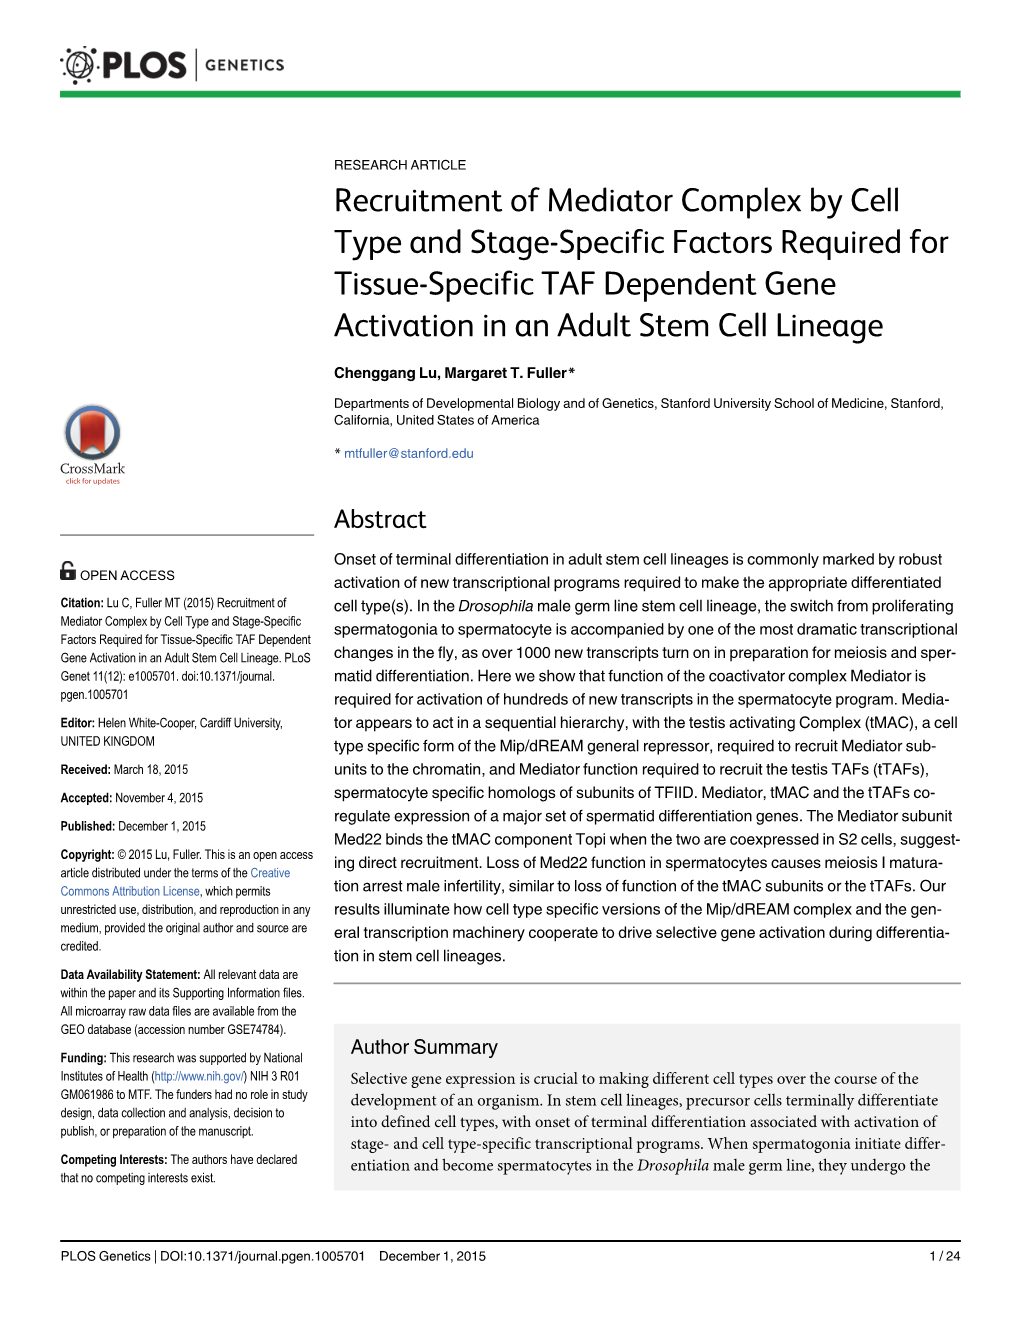 Recruitment of Mediator Complex by Cell Type and Stage-Specific Factors Required for Tissue-Specific TAF Dependent Gene Activation in an Adult Stem Cell Lineage